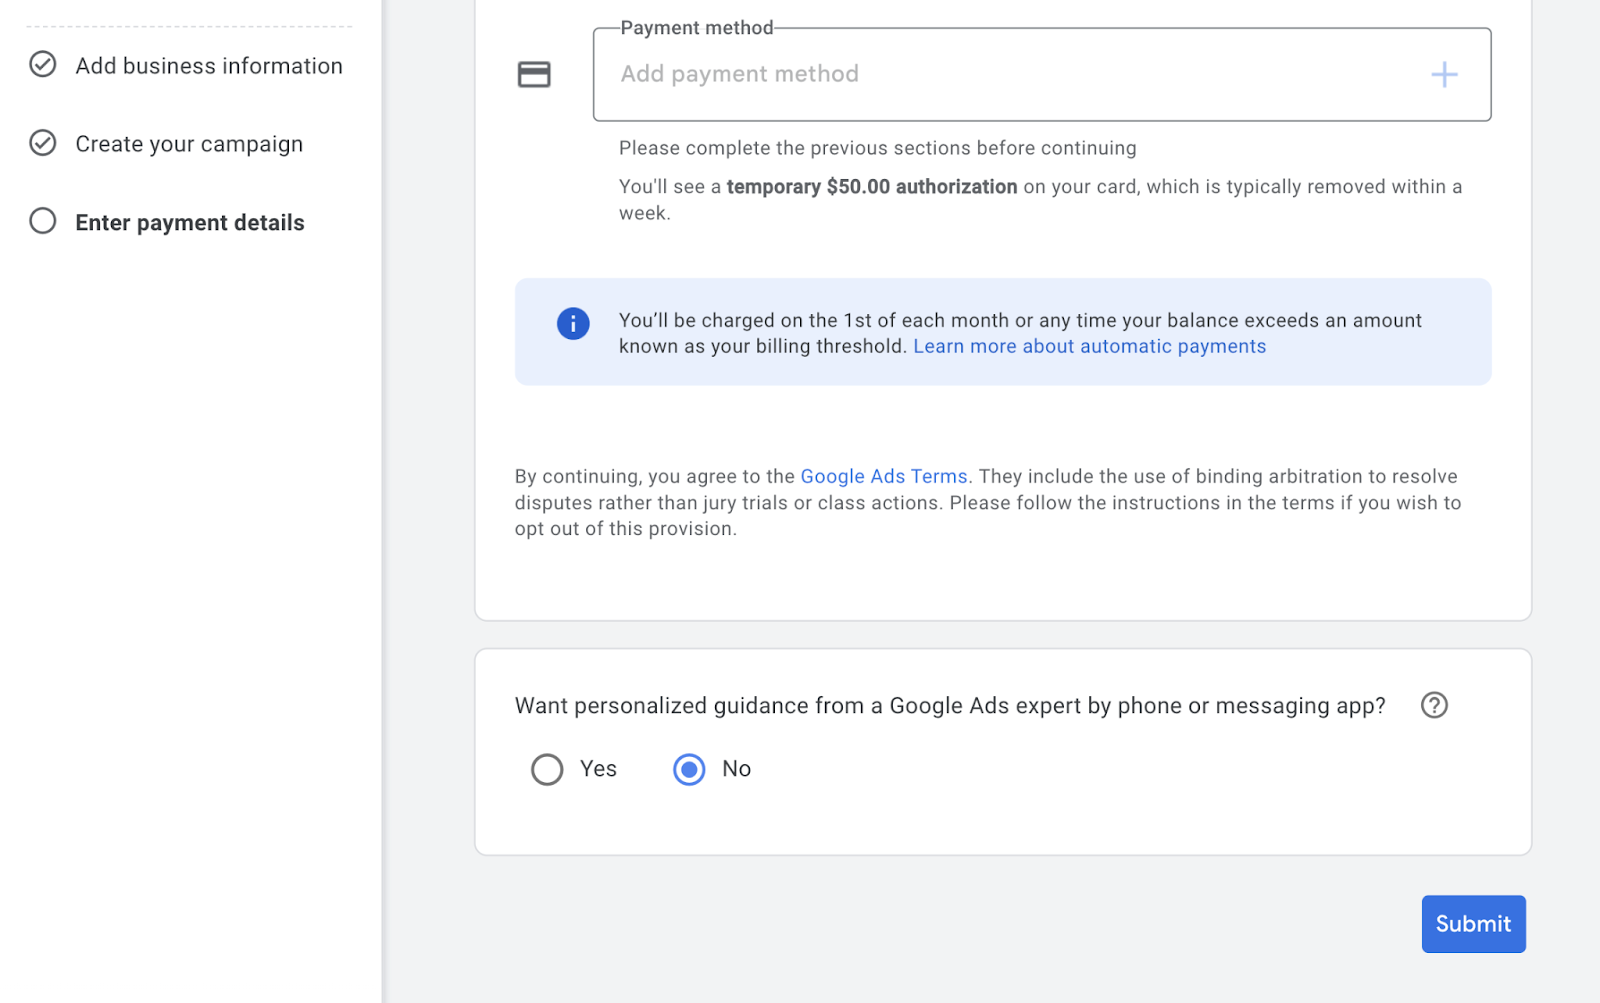 no option chosen to receive personalized guidance from google